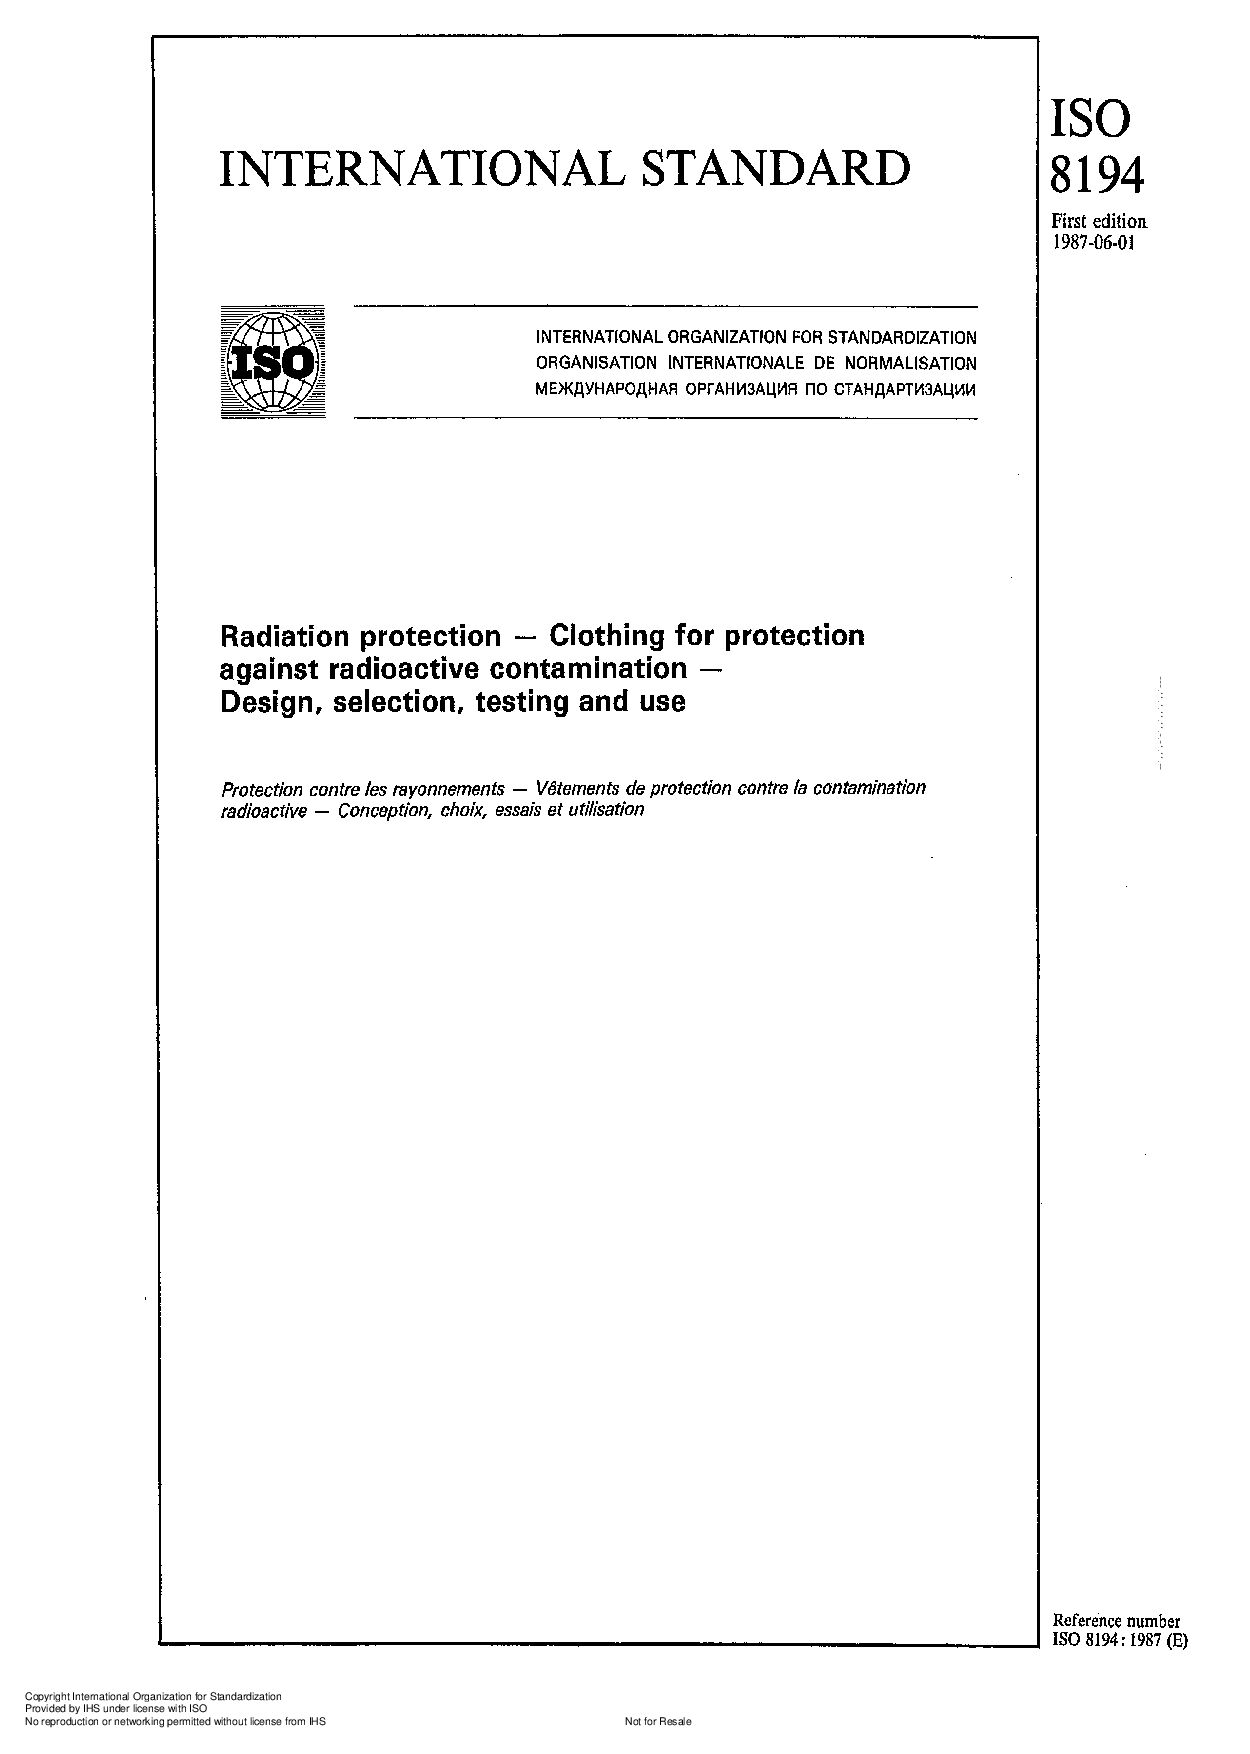 ISO 8194-1987